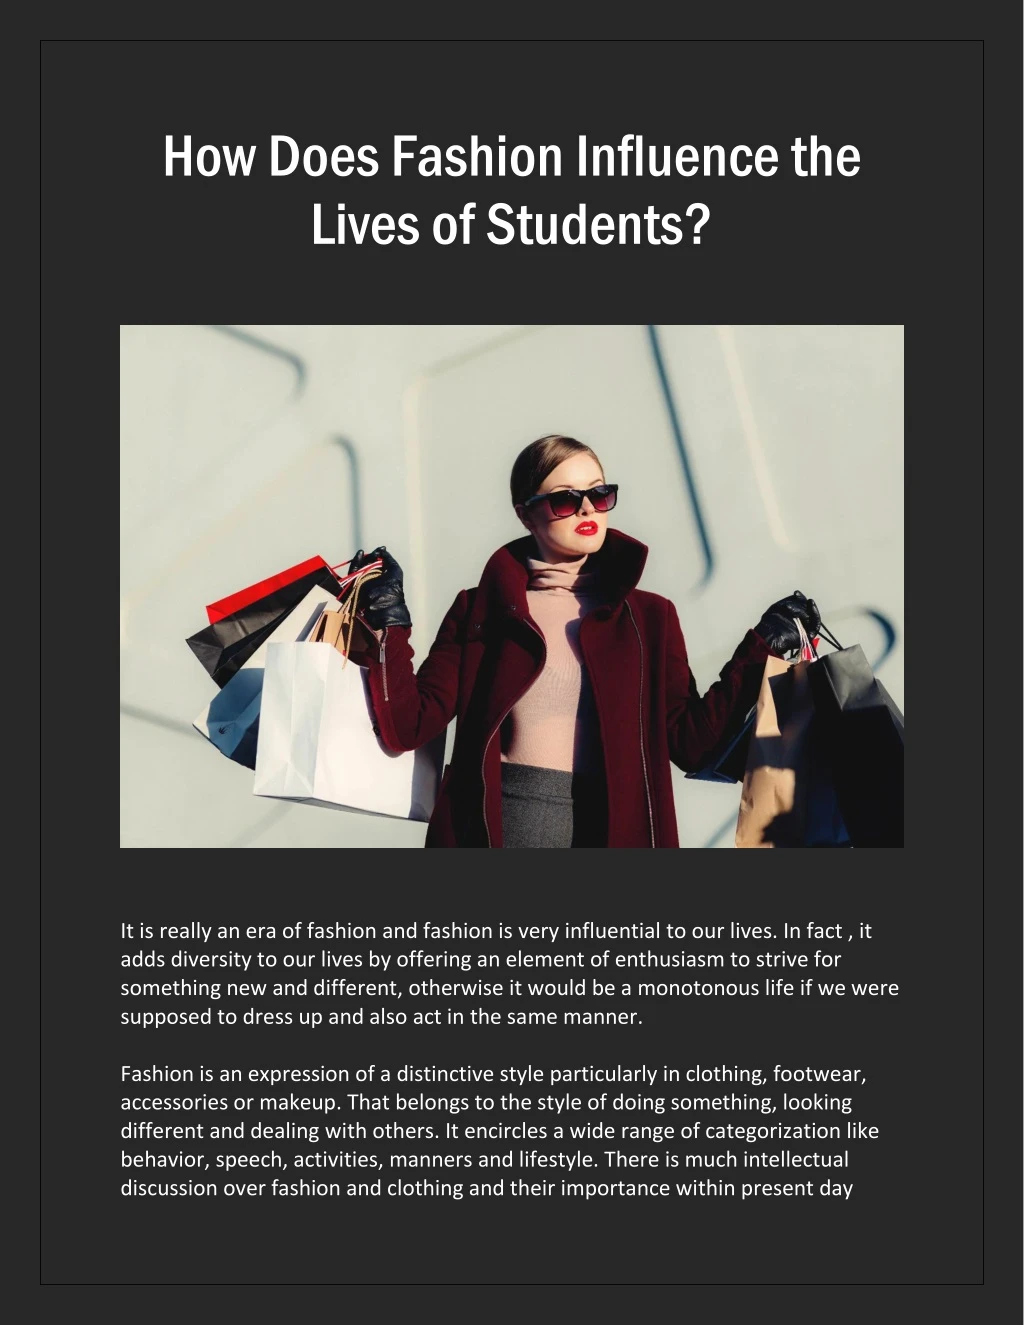 how does fashion influence the lives of students